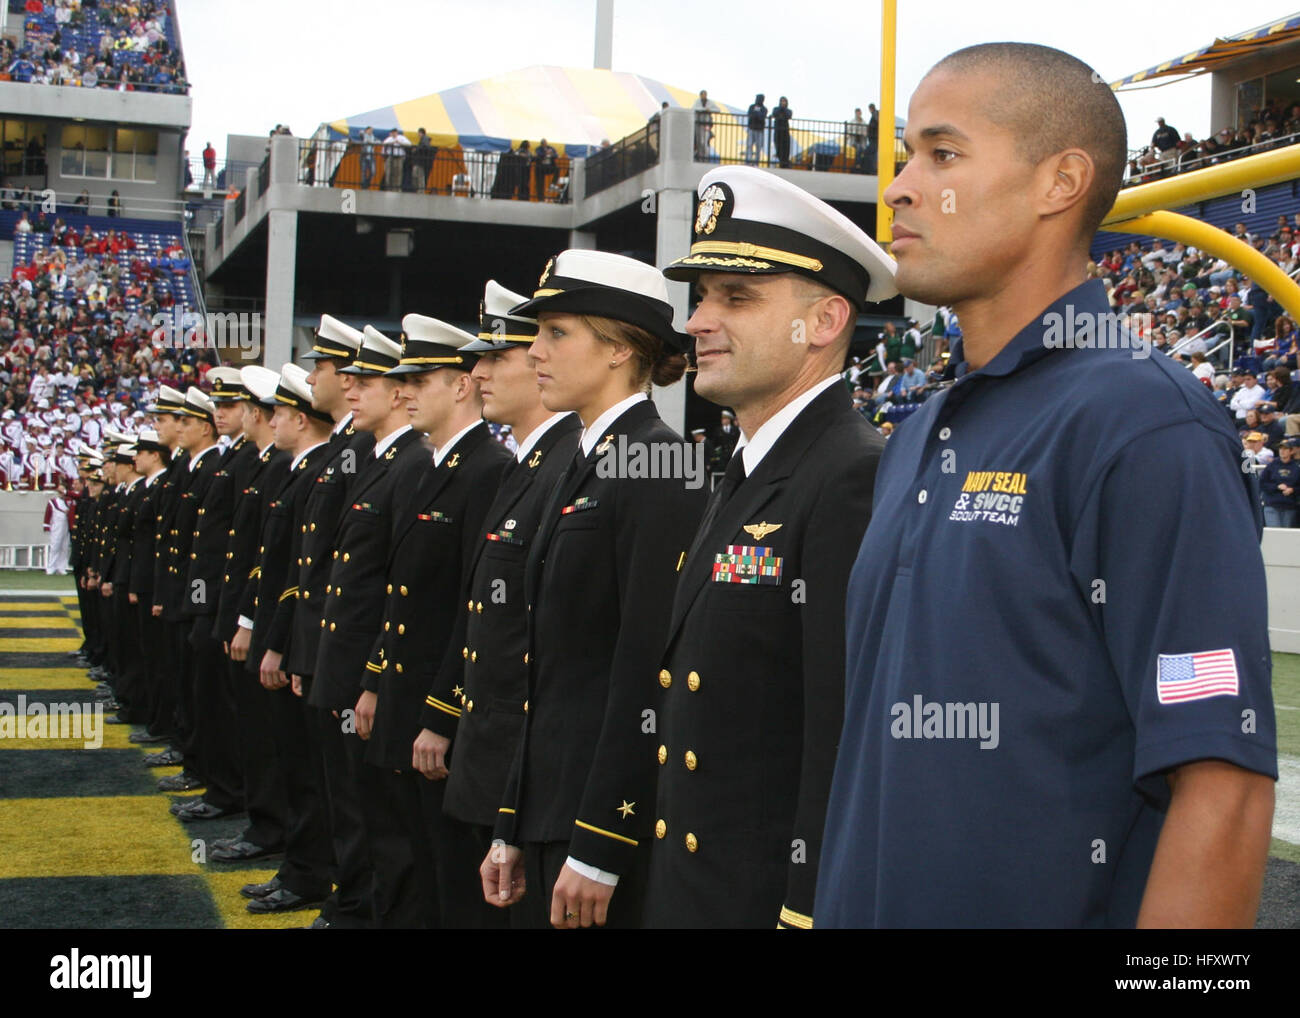 091030-N-5366K-174 ANNAPOLIS, Md. (Oct. 31, 2009) Special Warfare Operator 1st Class (SEAL) David Goggins stands at attention with members of the U.S. Naval Academy's triathlon team as they are recognized as Collegiate National Champions at the Navy-Marine Corps Stadium during a football game. The team named Goggins an honorary team member during the event. (U.S. Navy photo by Mass Communication Specialist 2nd Class Michelle Kapica/Released) US Navy 091030-N-5366K-174 Special Warfare Operator 1st Class (SEAL) David Goggins stands at attention with members of the U.S. Naval Academy's triathlon  Stock Photo